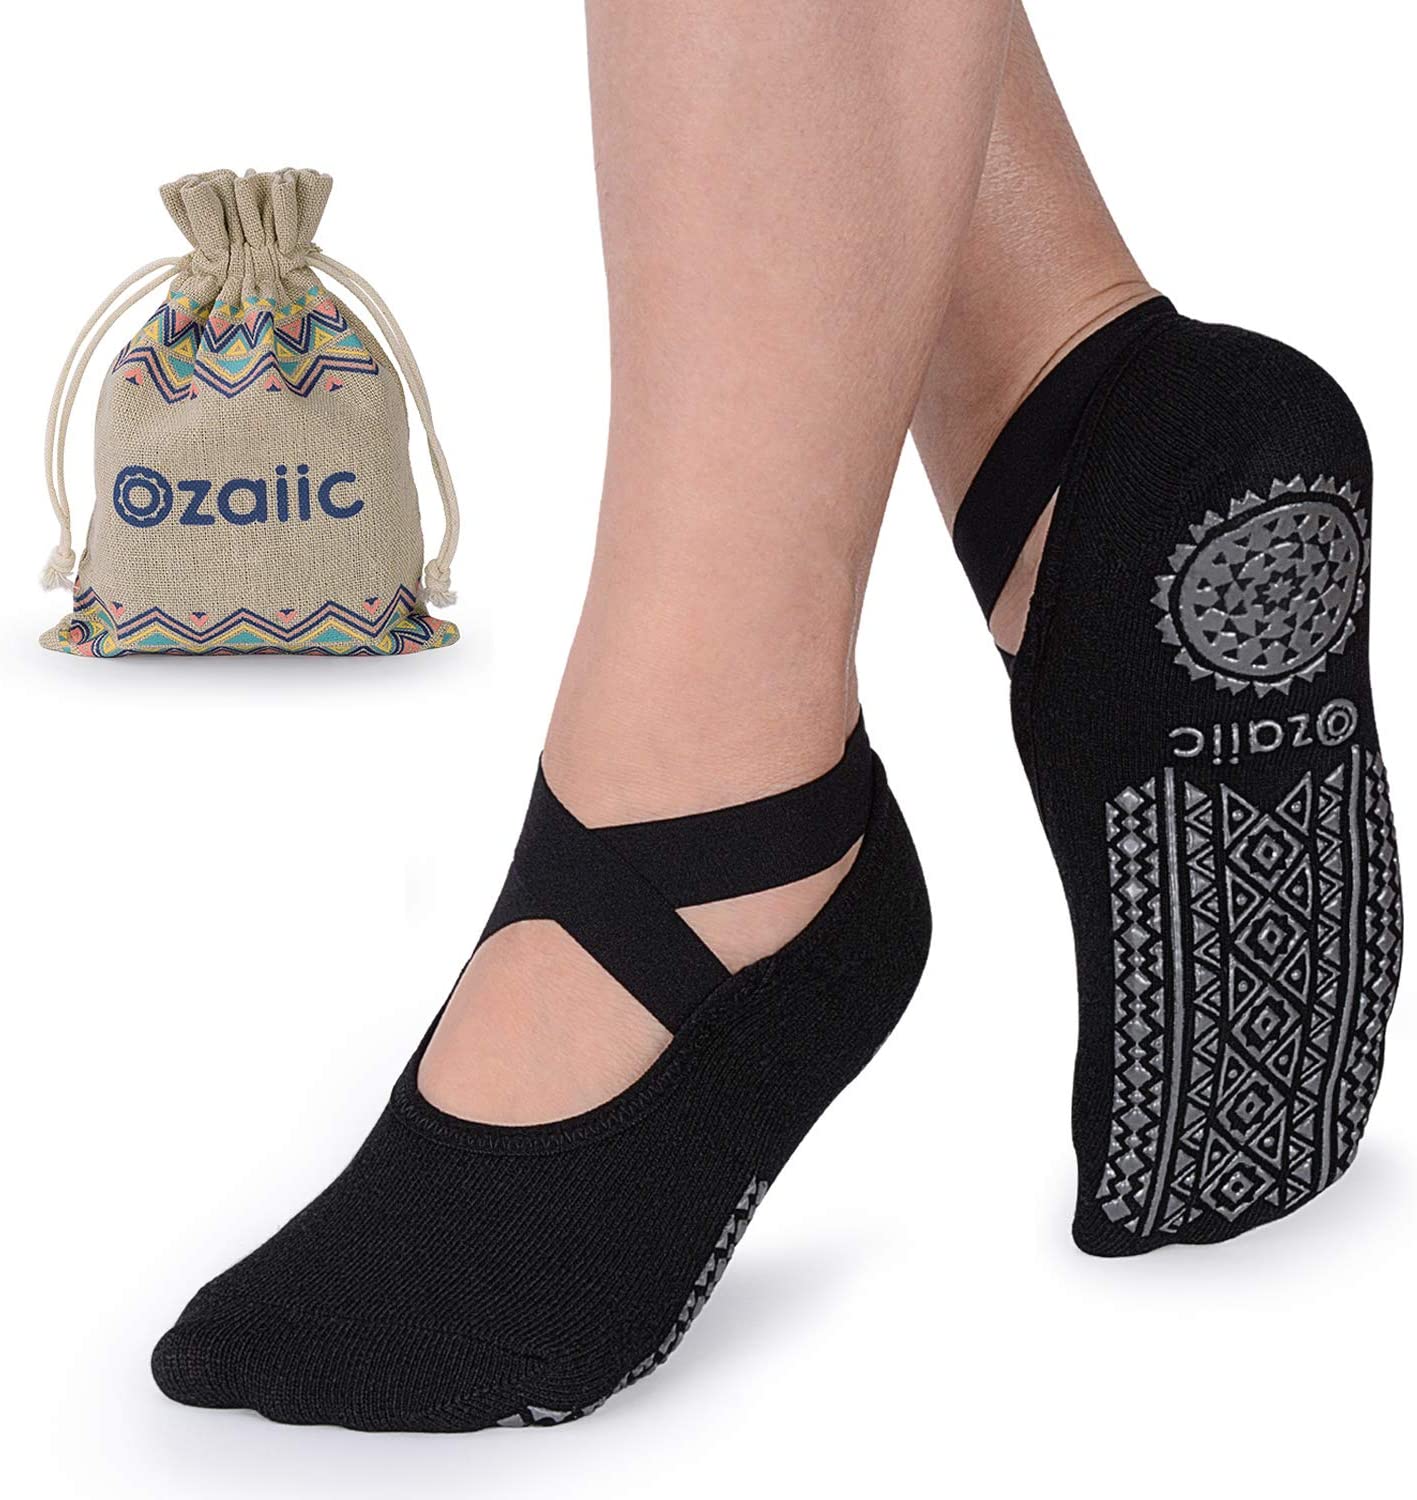  Ozaiic Yoga Socks for Women with Grips, Non-Slip Five Toe Socks  for Pilates, Barre, Ballet, Fitness : Clothing, Shoes & Jewelry